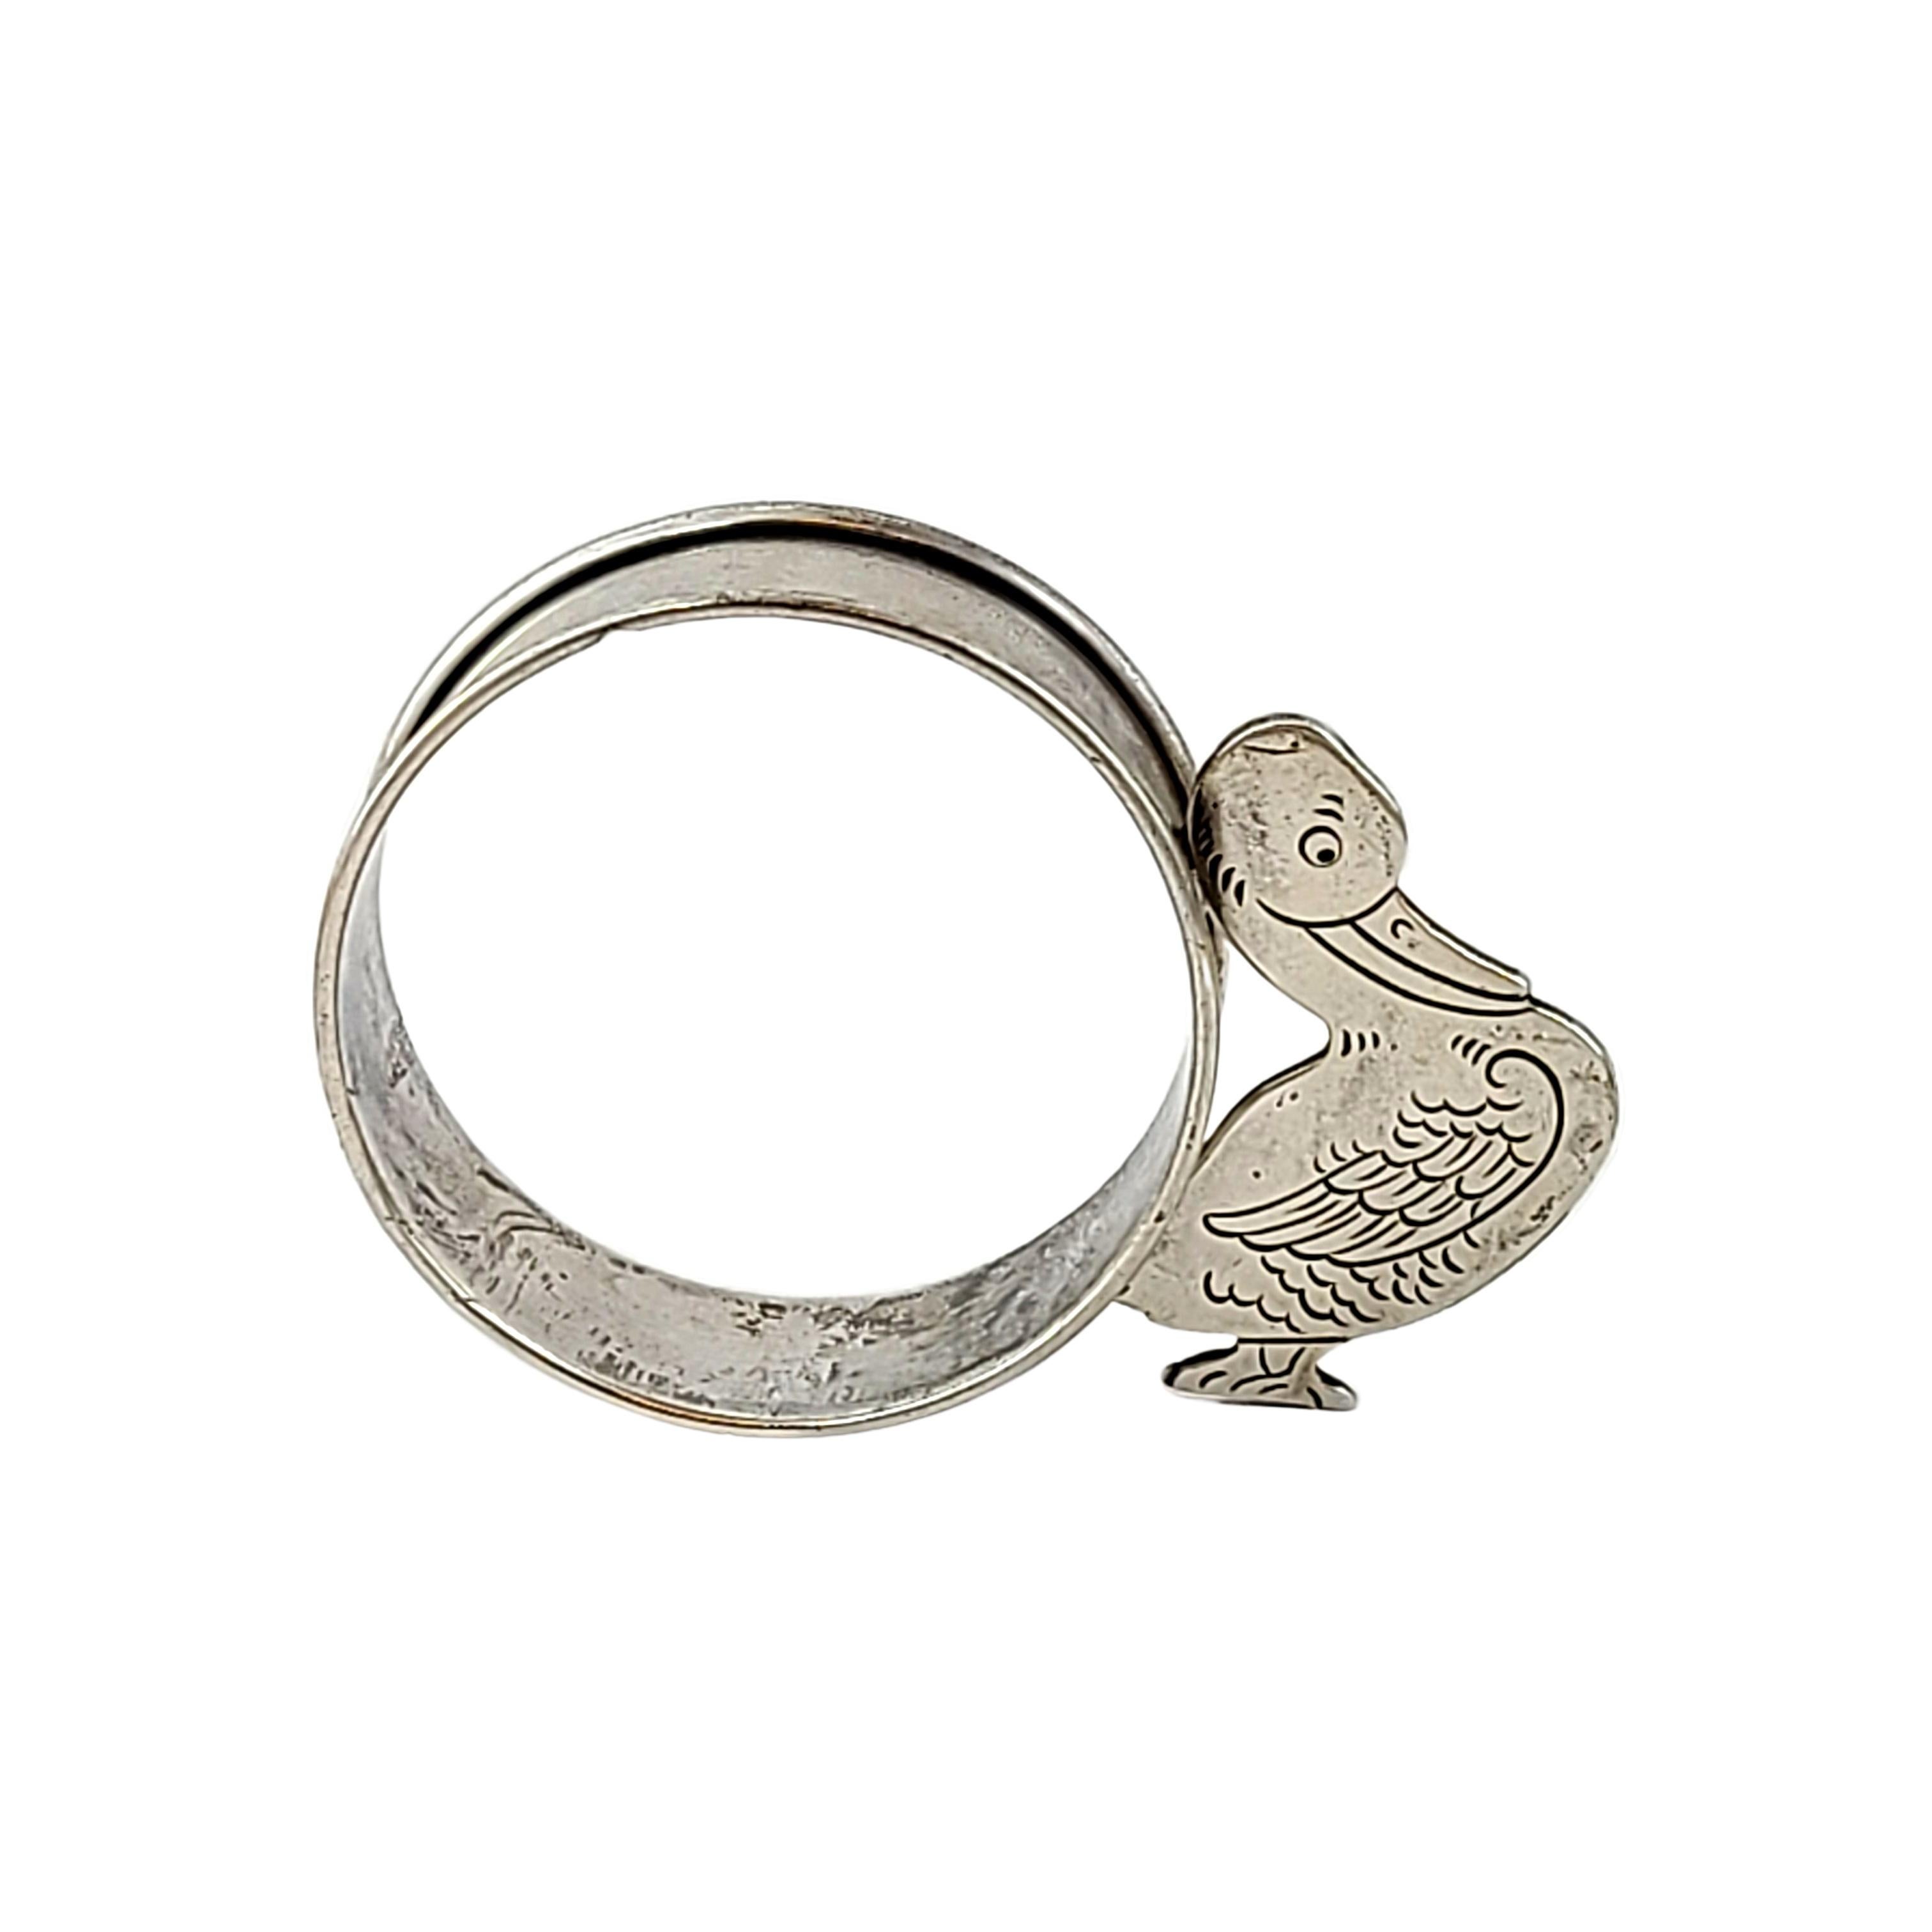 Webster sterling silver duck napkin ring

This adorable sterling silver baby or child napkin ring is accented with a highly detailed duck. So sweet, this napkin ring will continue to be a wonderful keepsake!

Measures approx 9/16